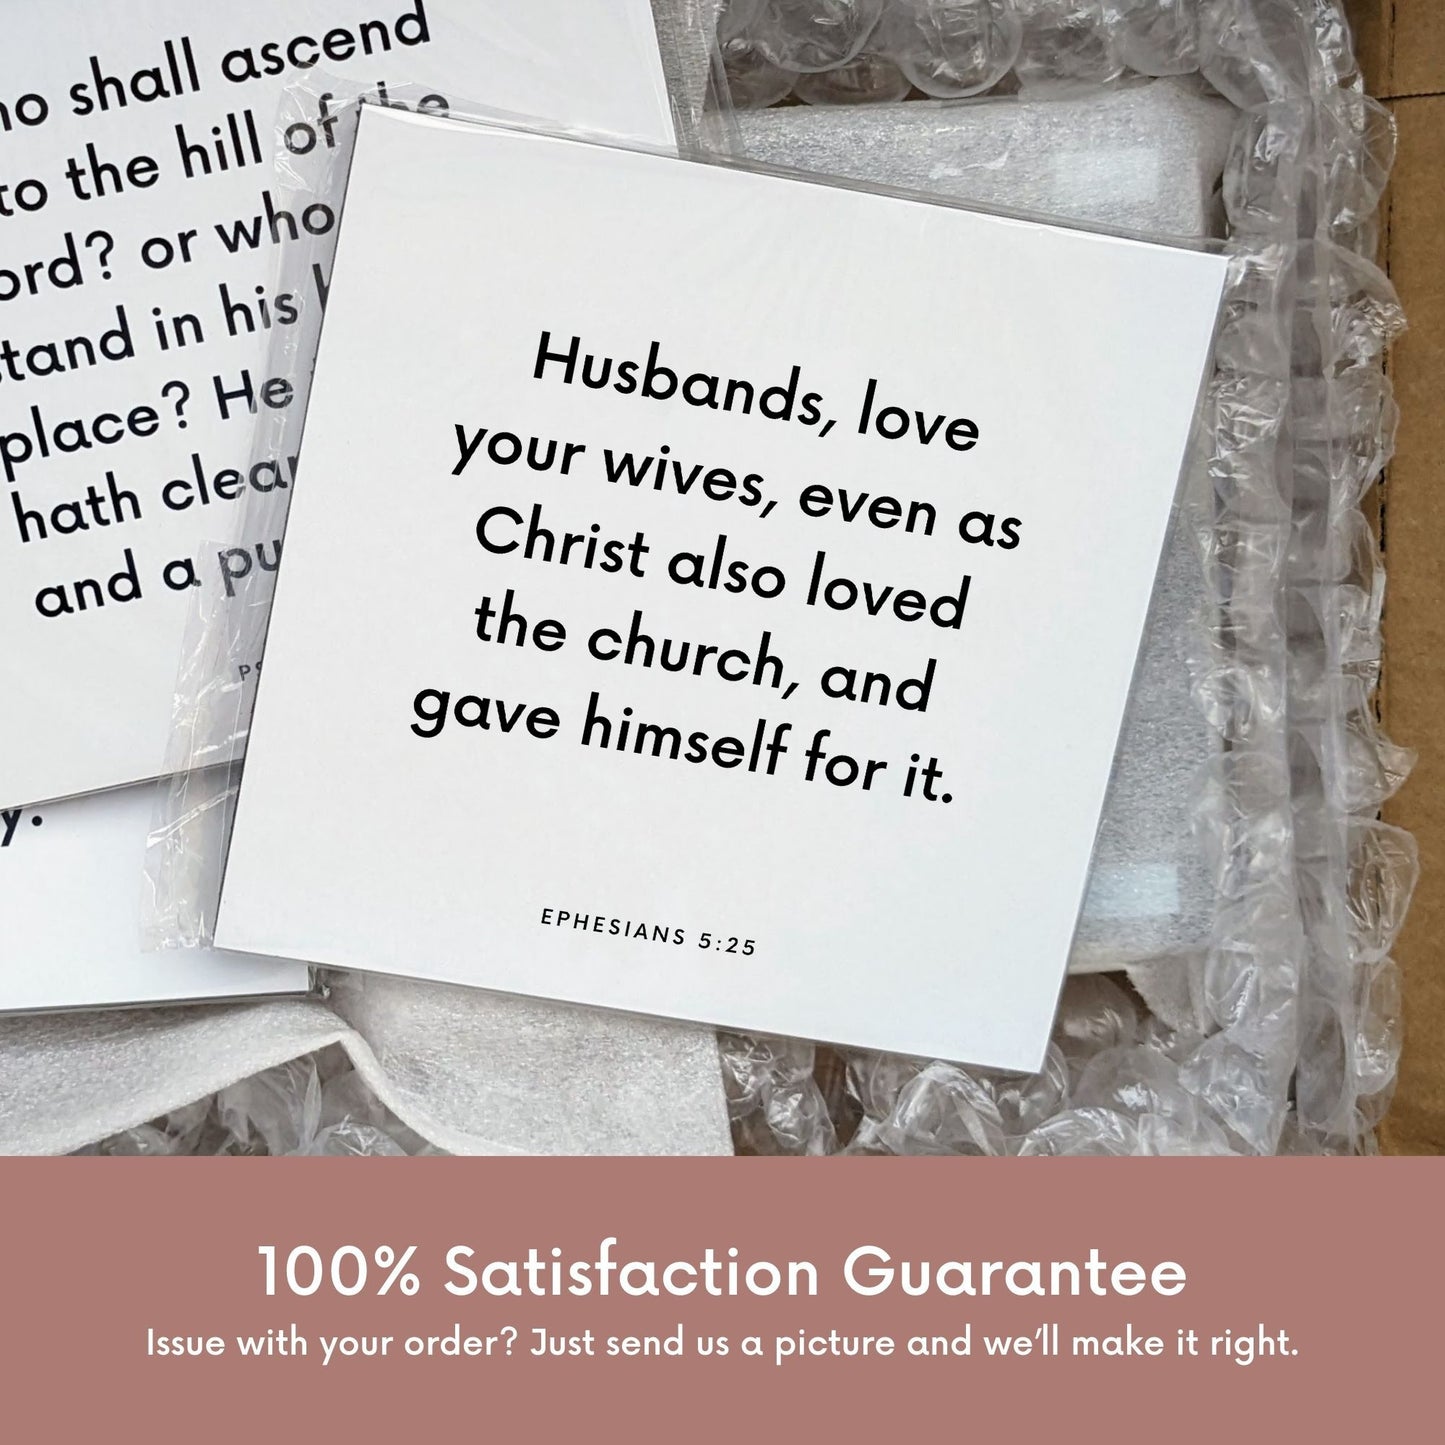 Shipping materials for scripture tile of Ephesians 5:25 - "Husbands, love your wives, even as Christ loved the church"